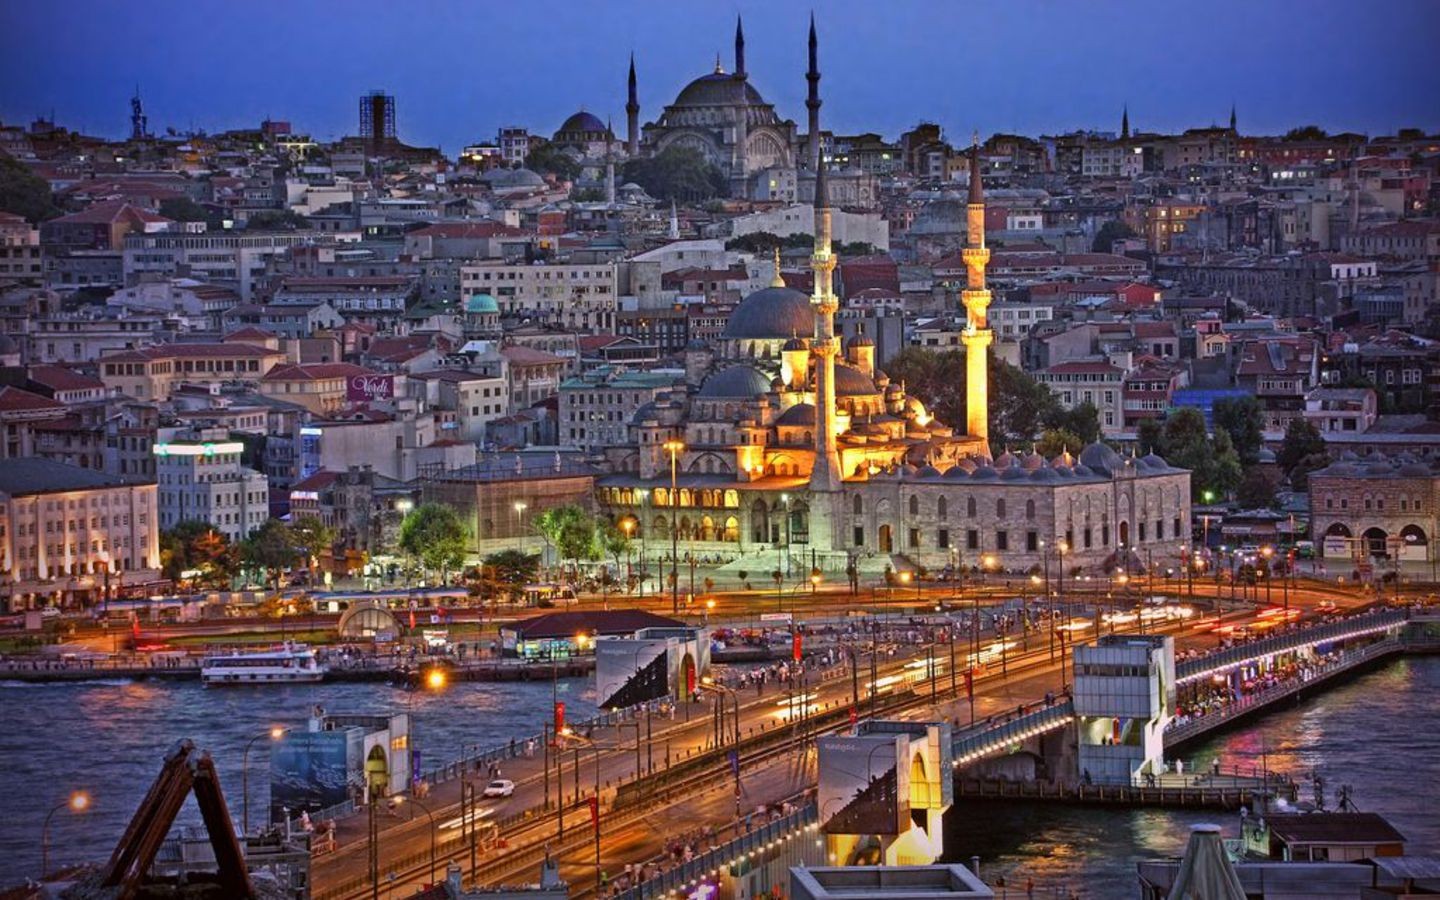 Istanbul, The City That Lies On Two Continents